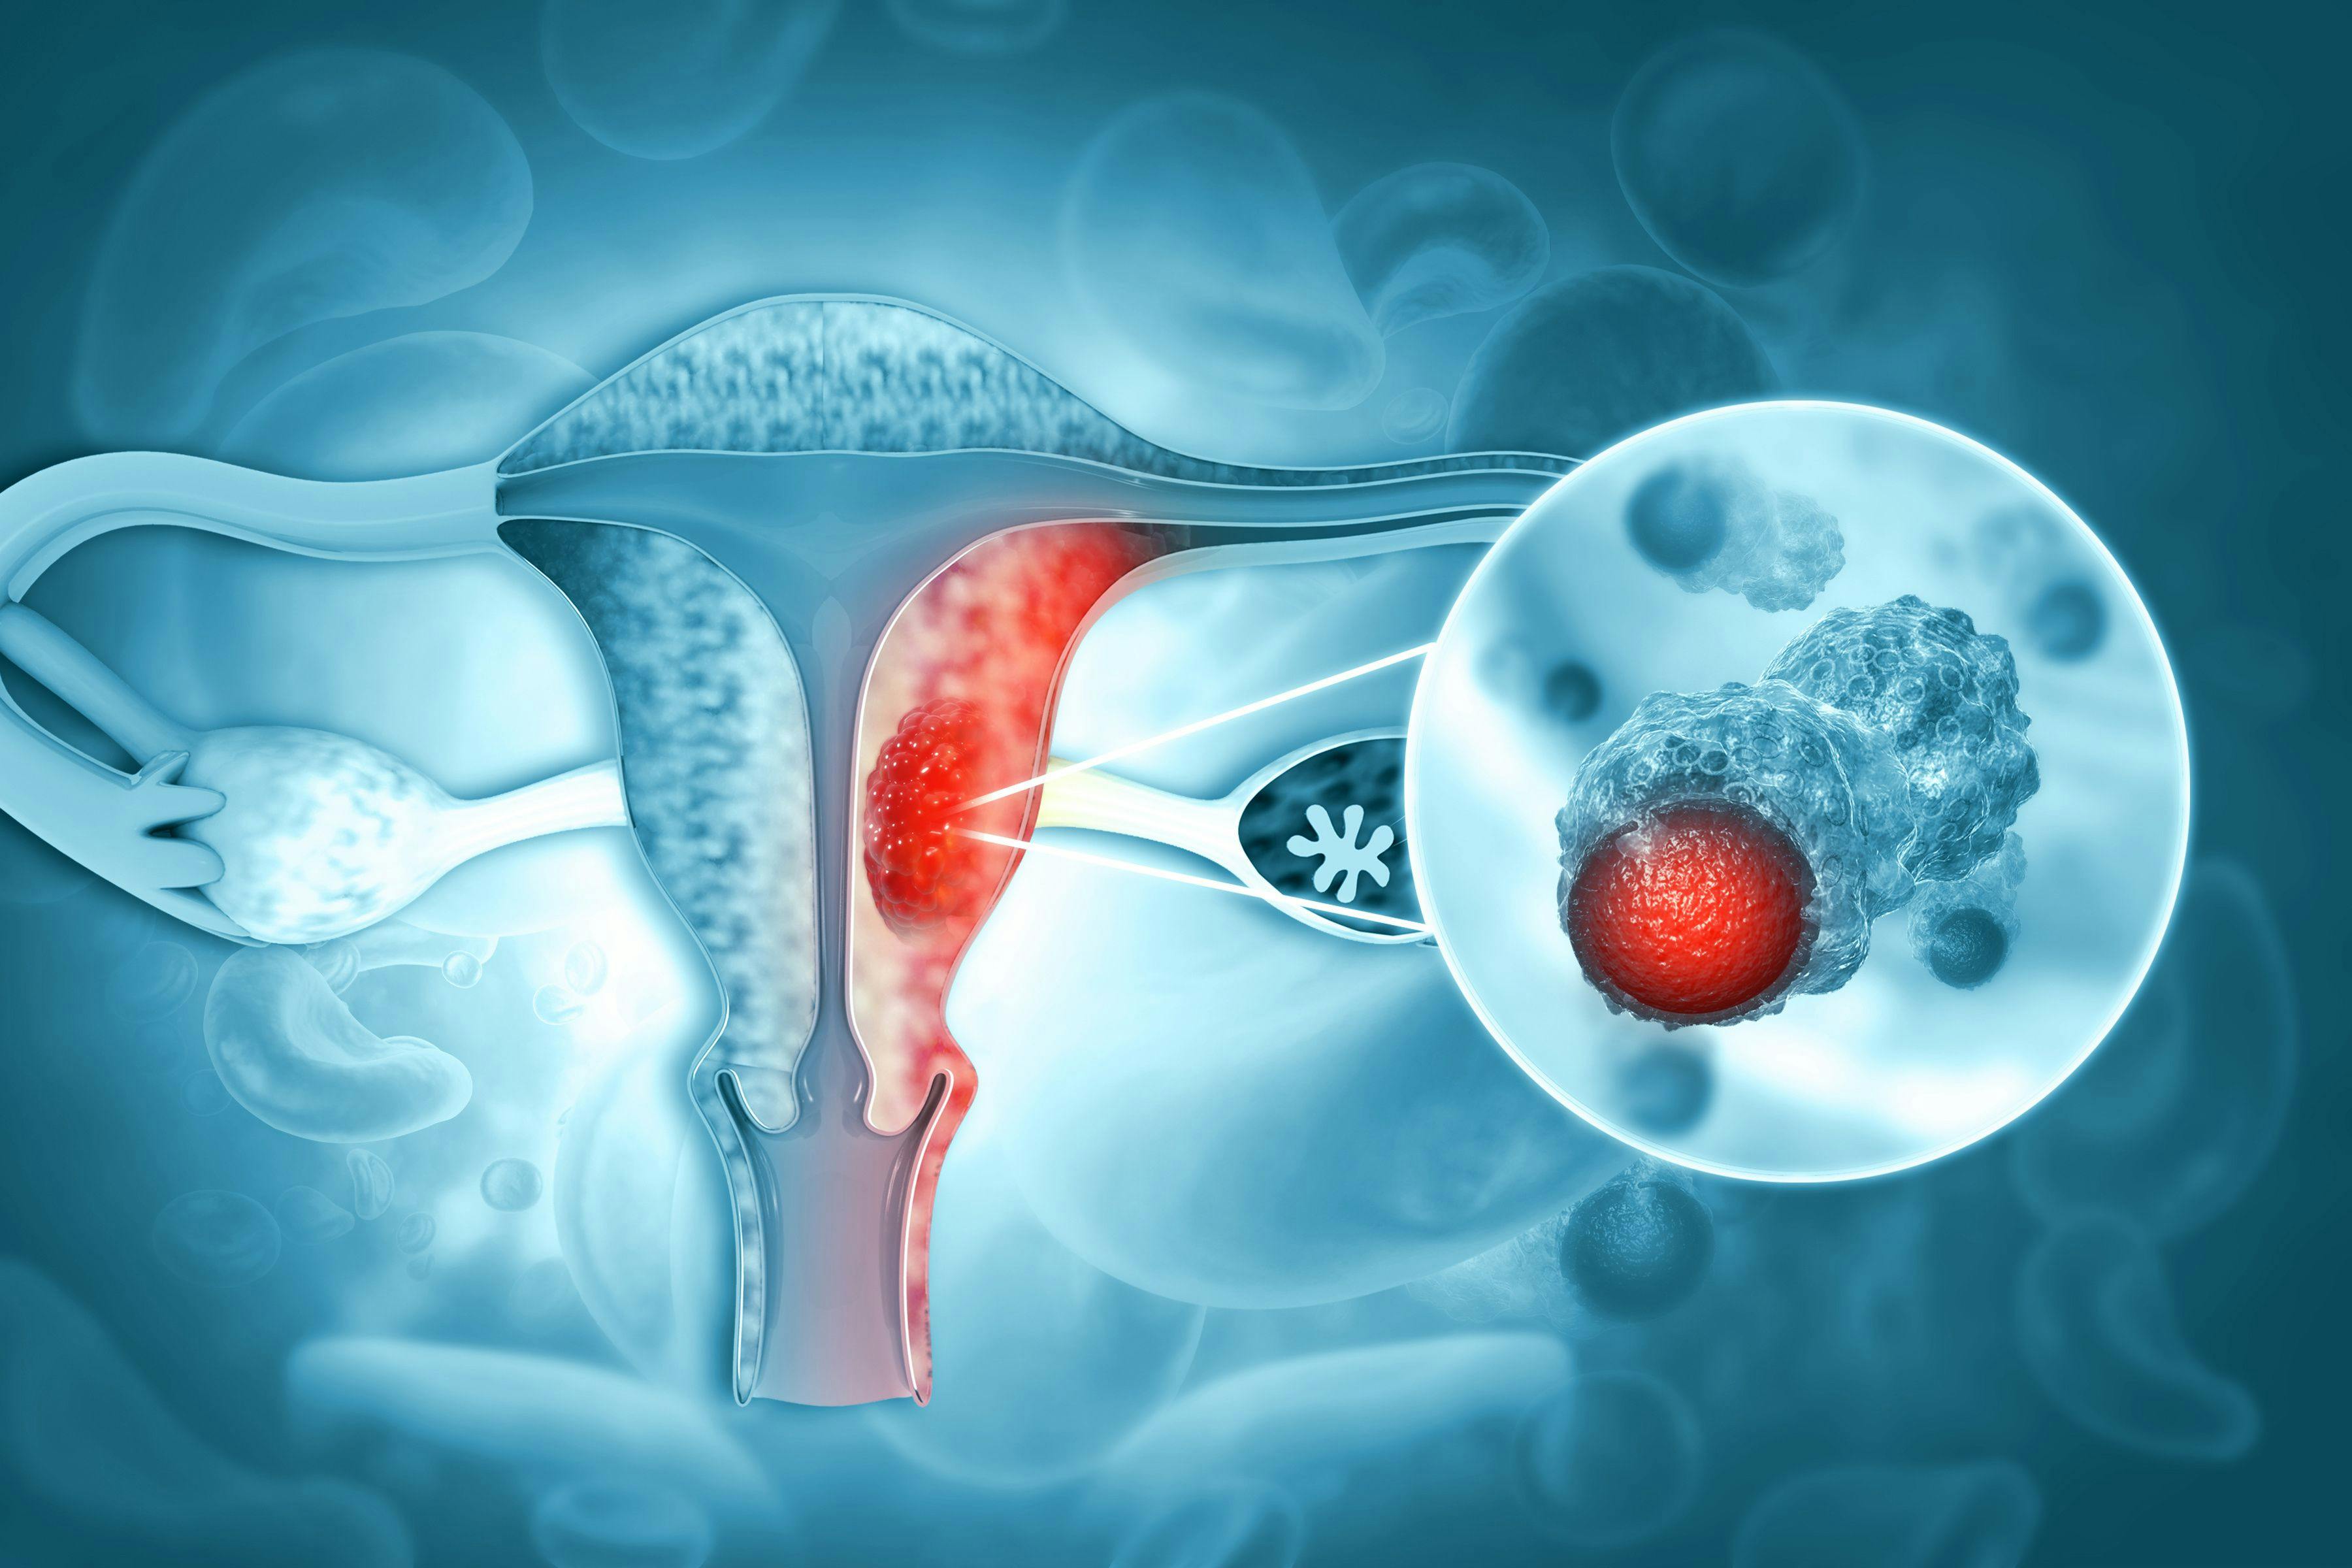 Female reproductive system diseases. Uterus cancer and endometrial malignant tumor as a uterine medical: ©Crystal Light - stock.adobe.com